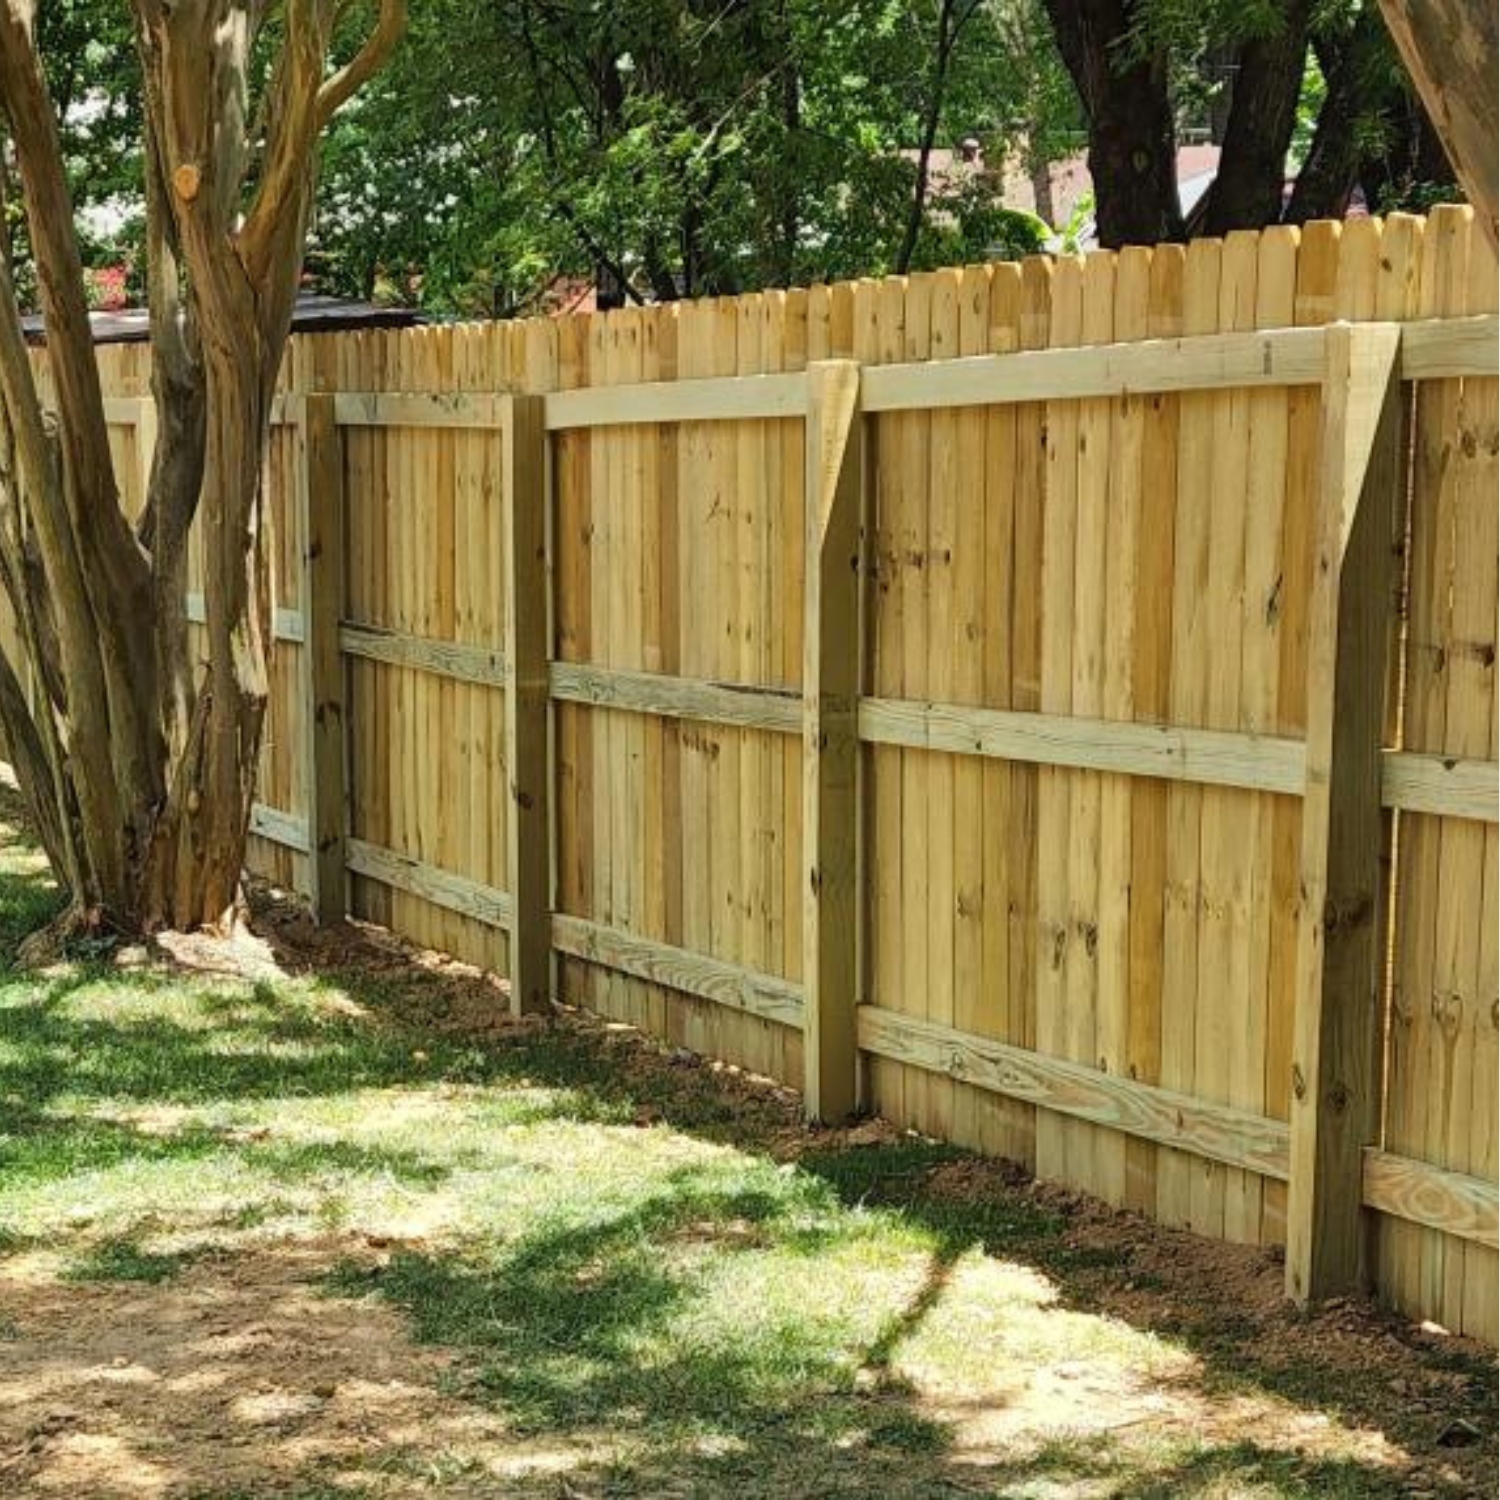 inside of privacy fence